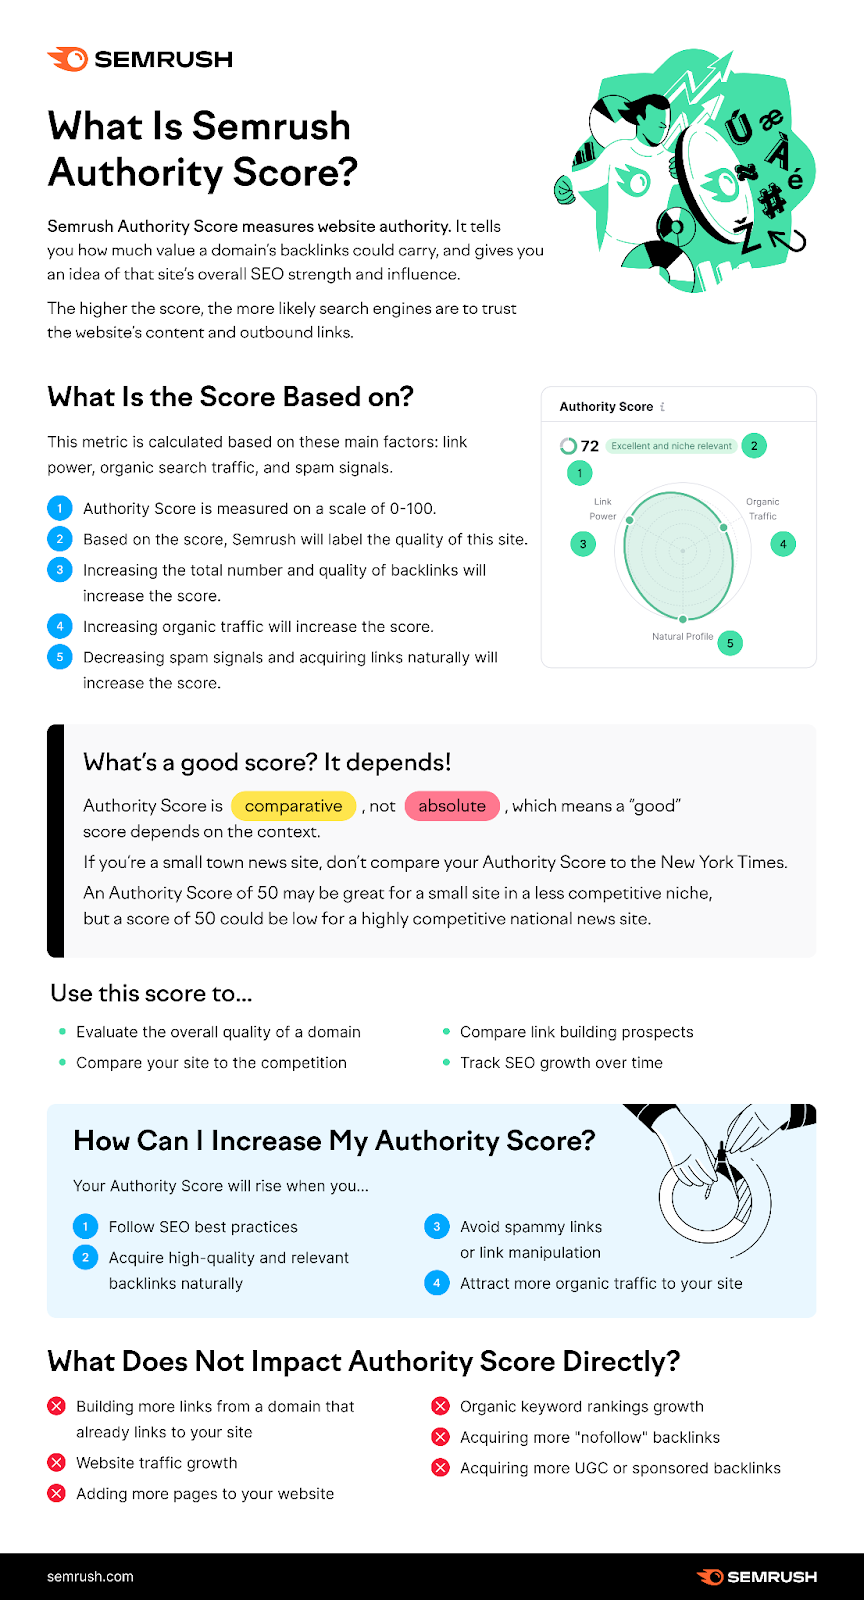 an infographic by Semrush on "What is Semrush Authority Score?"